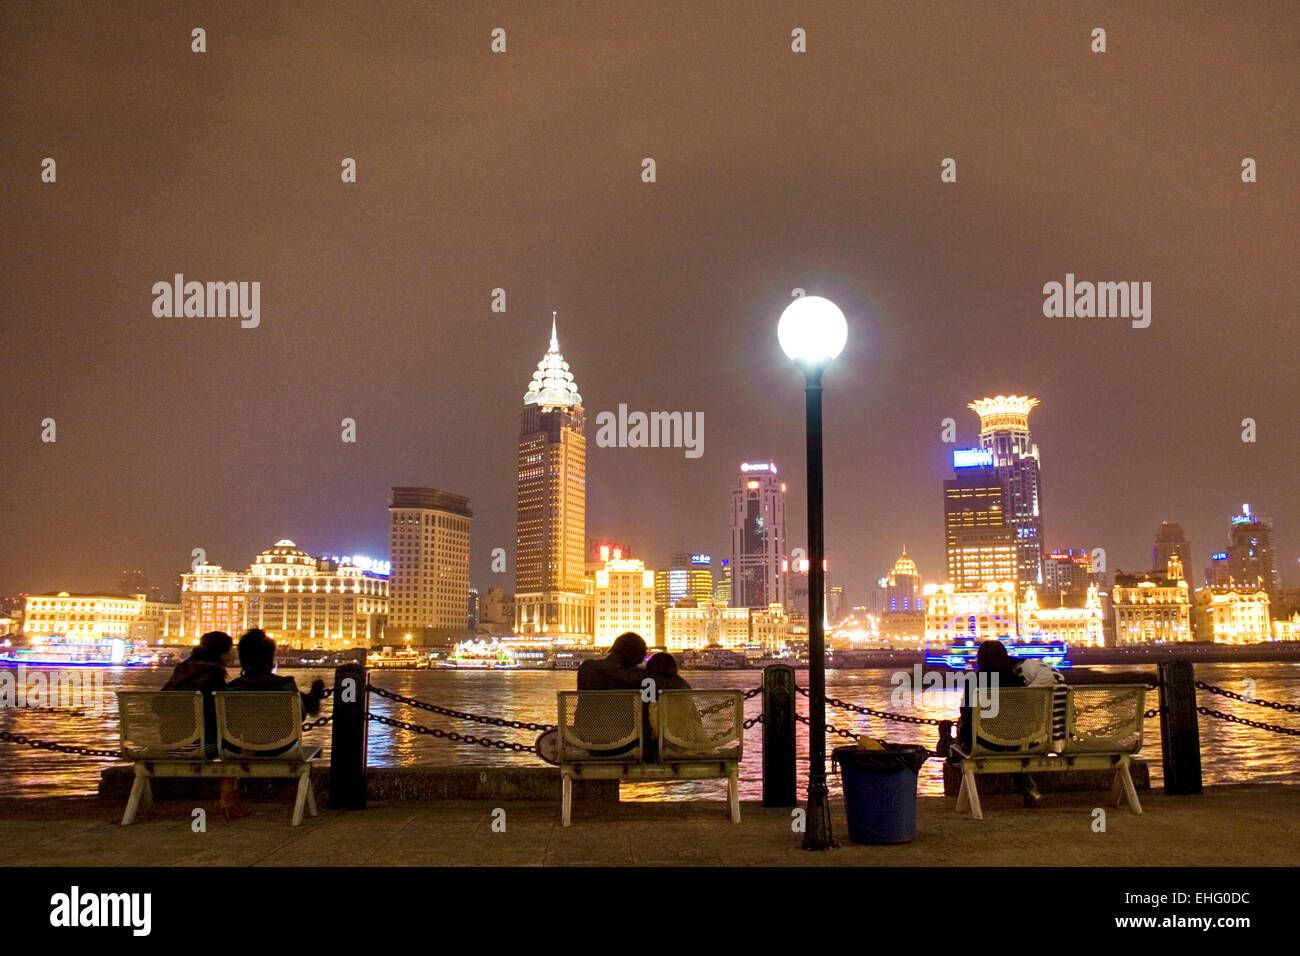 Couples spend a romantic evening taking in the Bund skyline Shanghai. Stock Photo